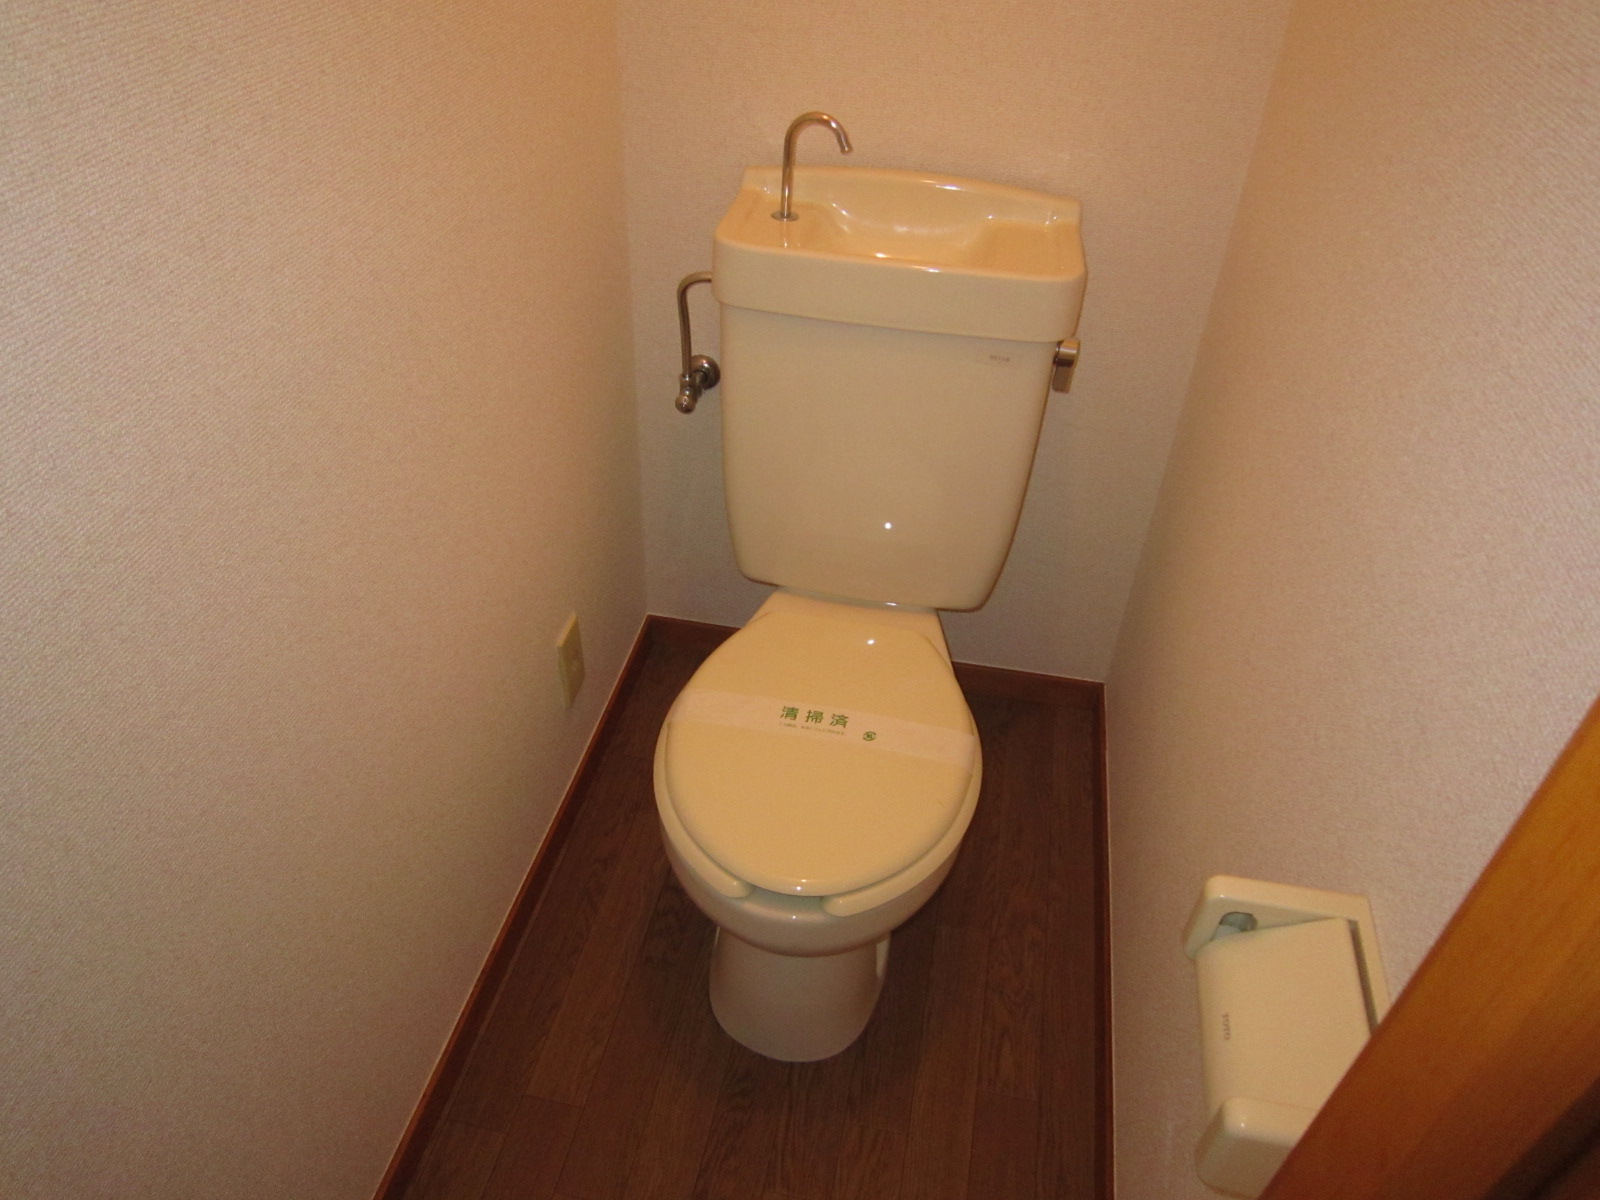 Toilet. A clean water around the high point! 